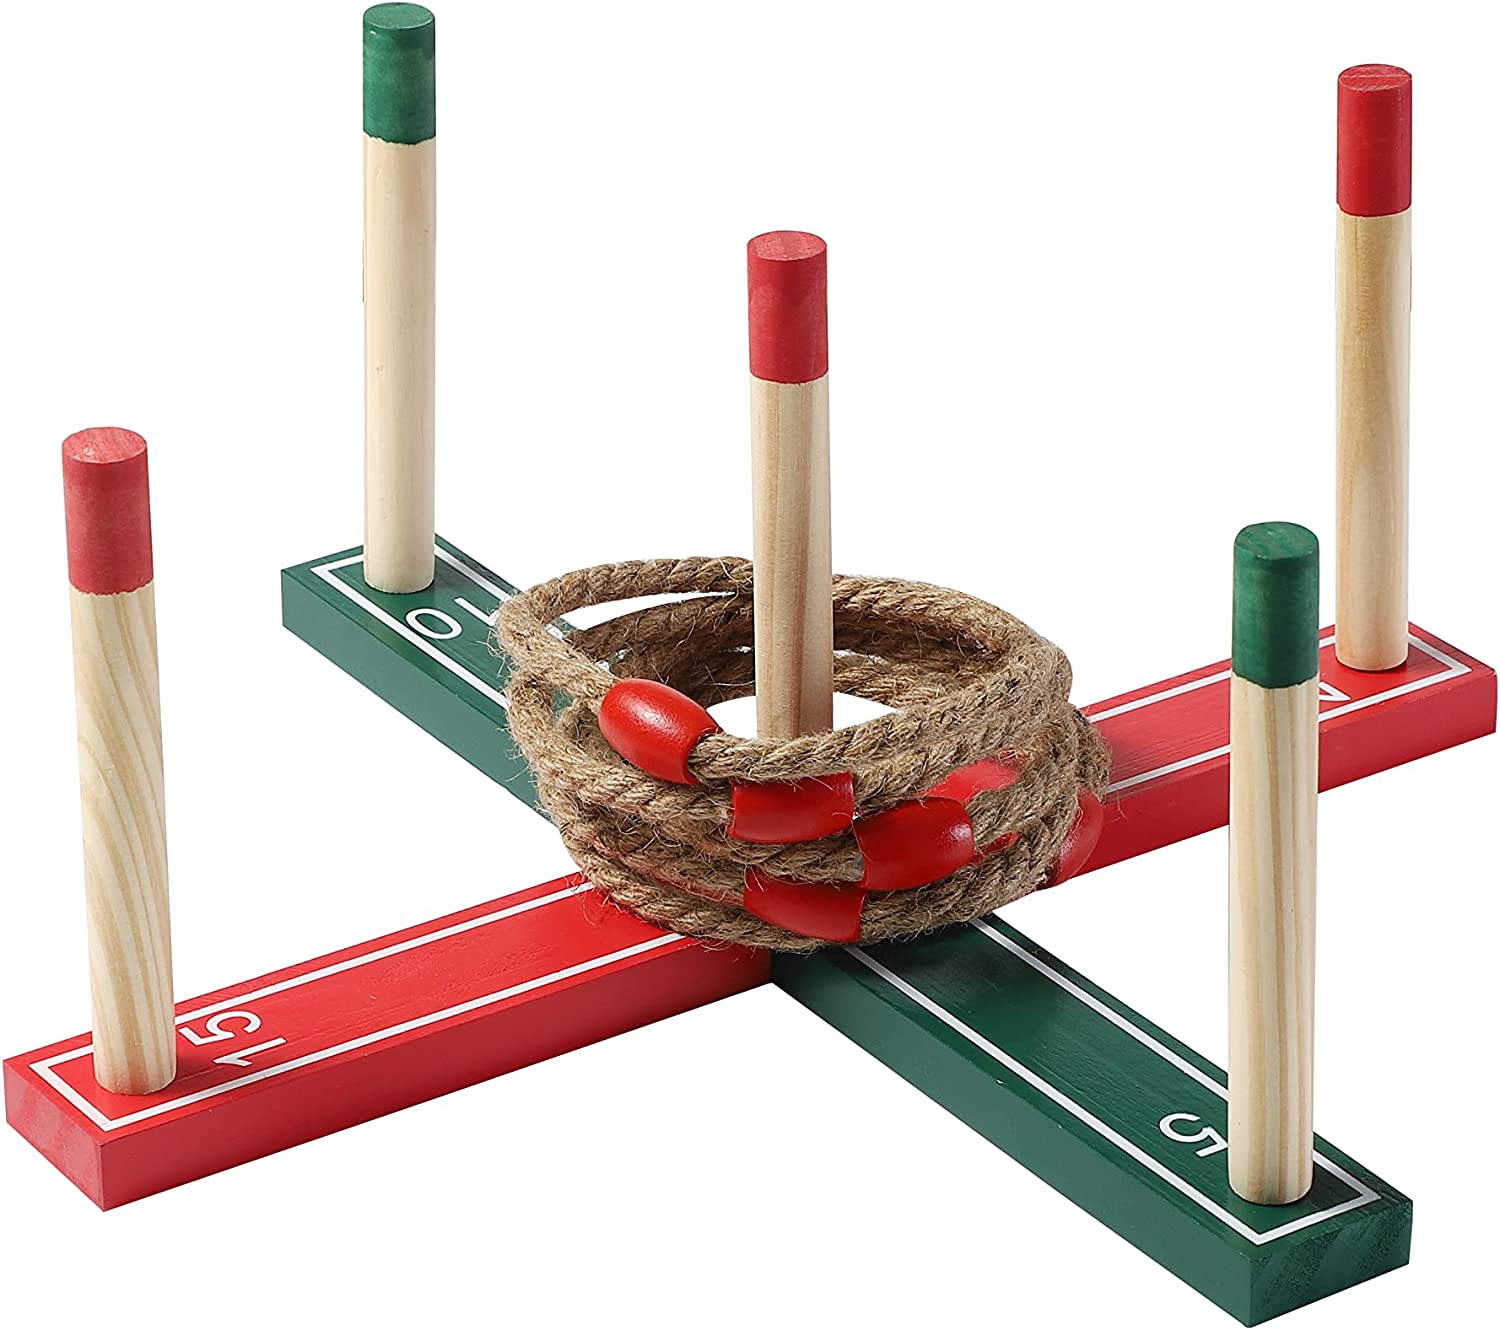 Quoits Wooden Set Ring Toss Game Perfect Toy For Outside Garden Games With Wood Pegs and Rope Hoops Hoopla